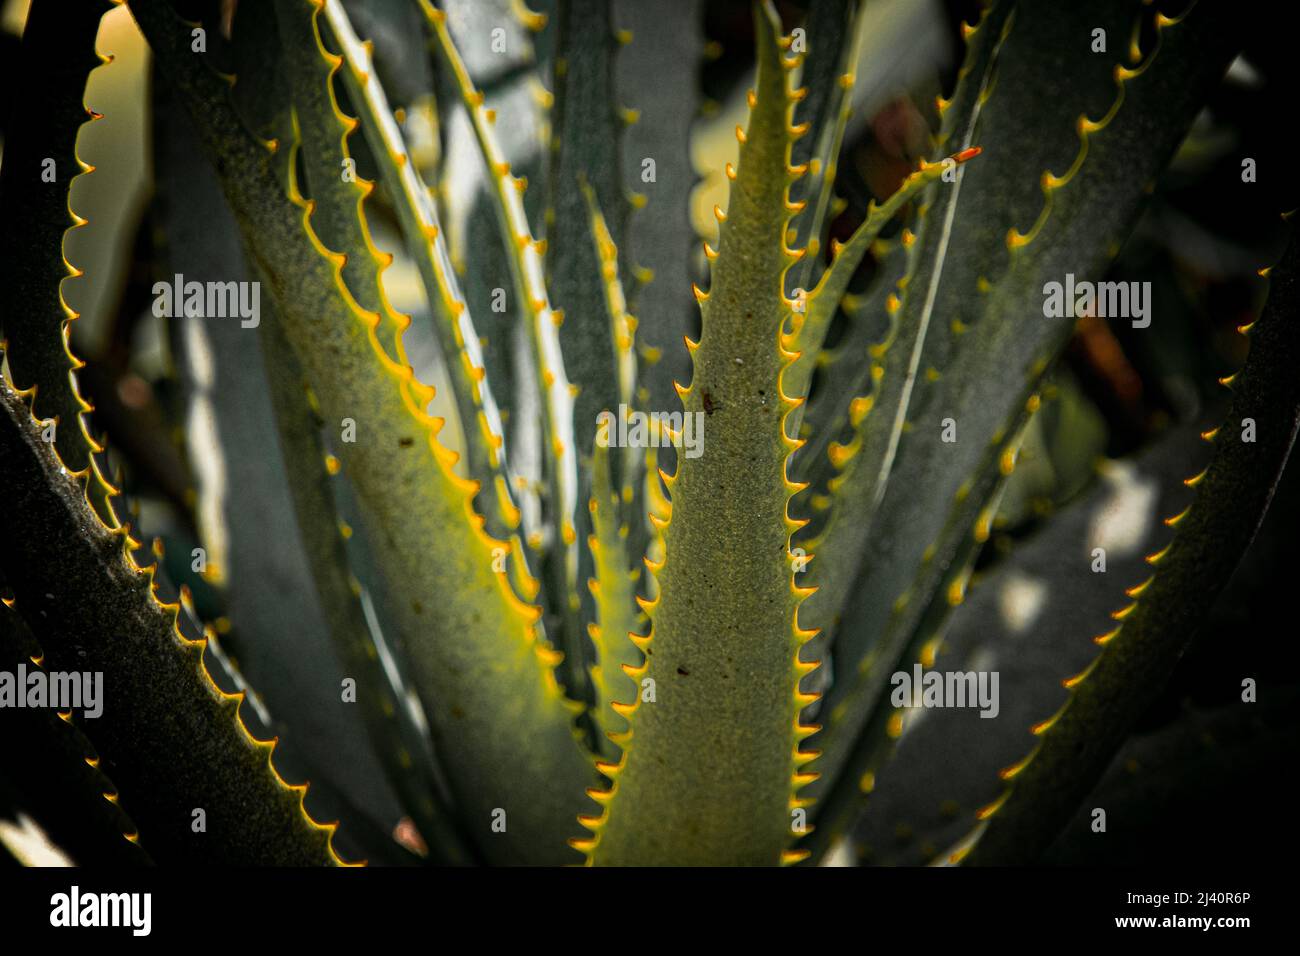 Fine art image of early morning sun on the leaves of an aloe vera plant Stock Photo